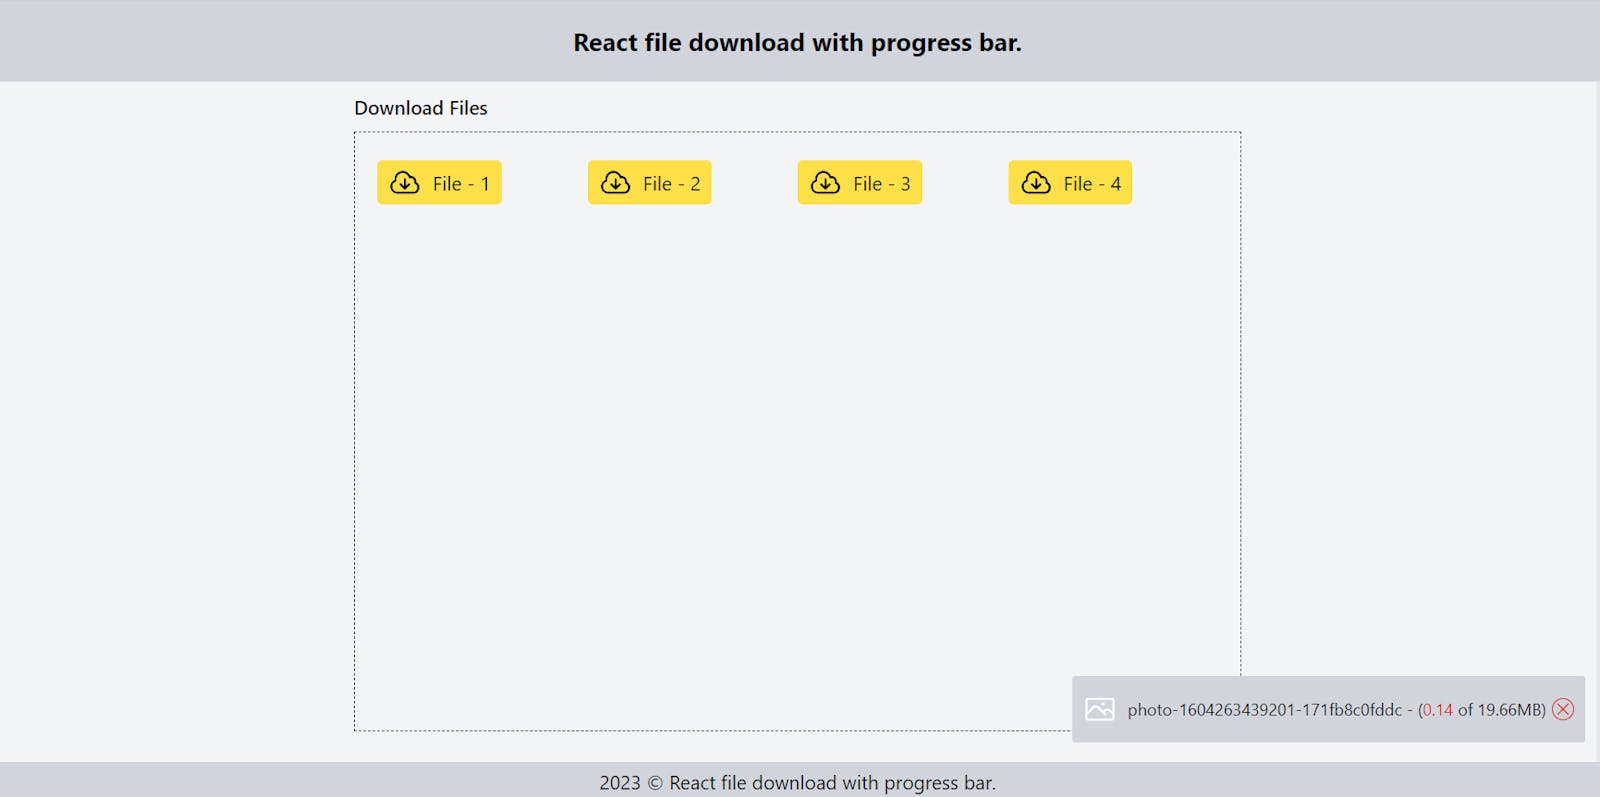 React file download with progress bar